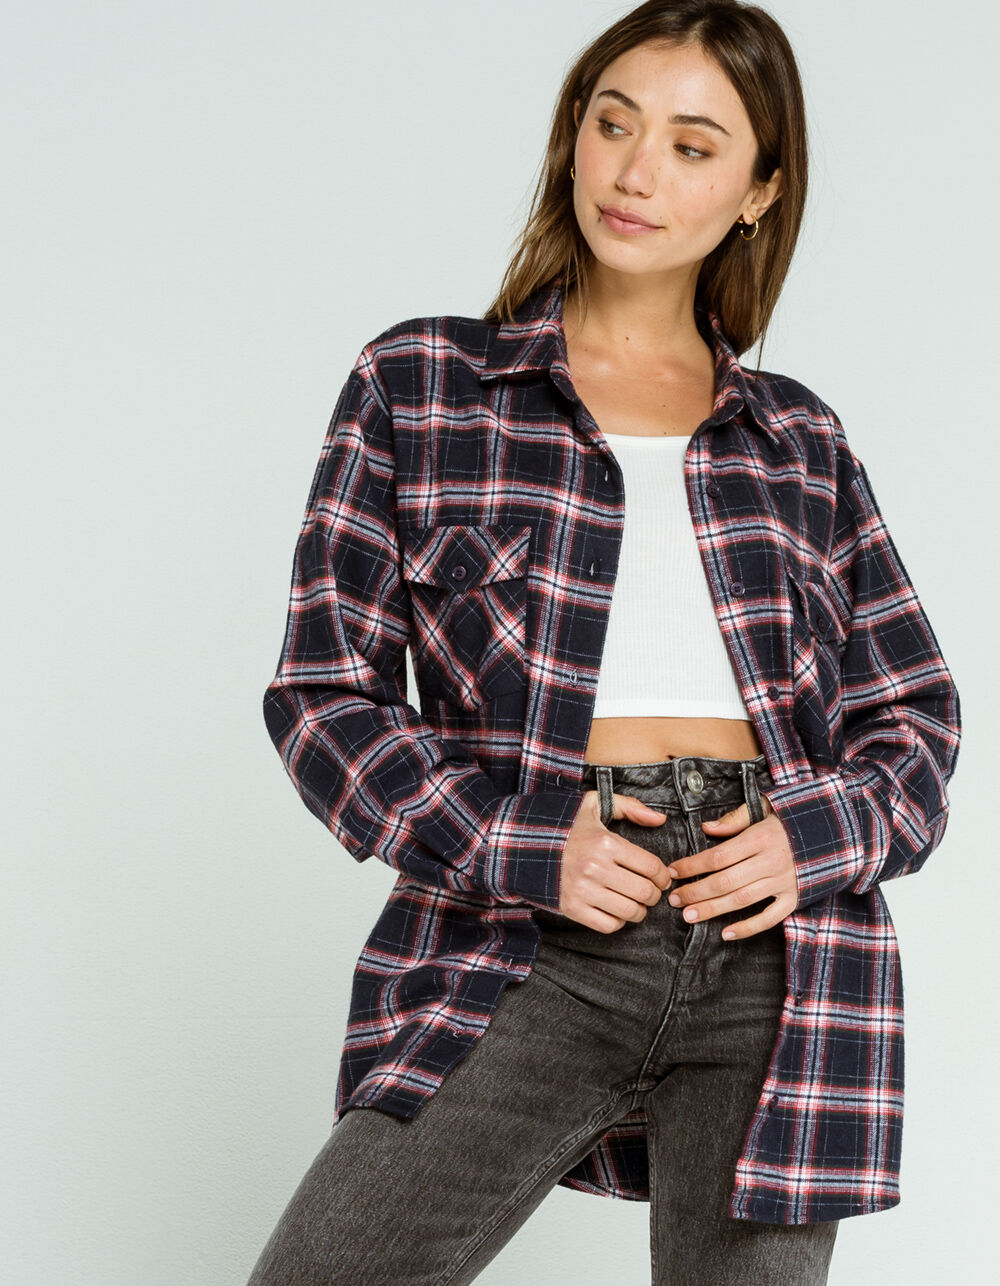 RSQ Plaid Womens Navy & Red Flannel Shirt - NAVY/RED | Tillys